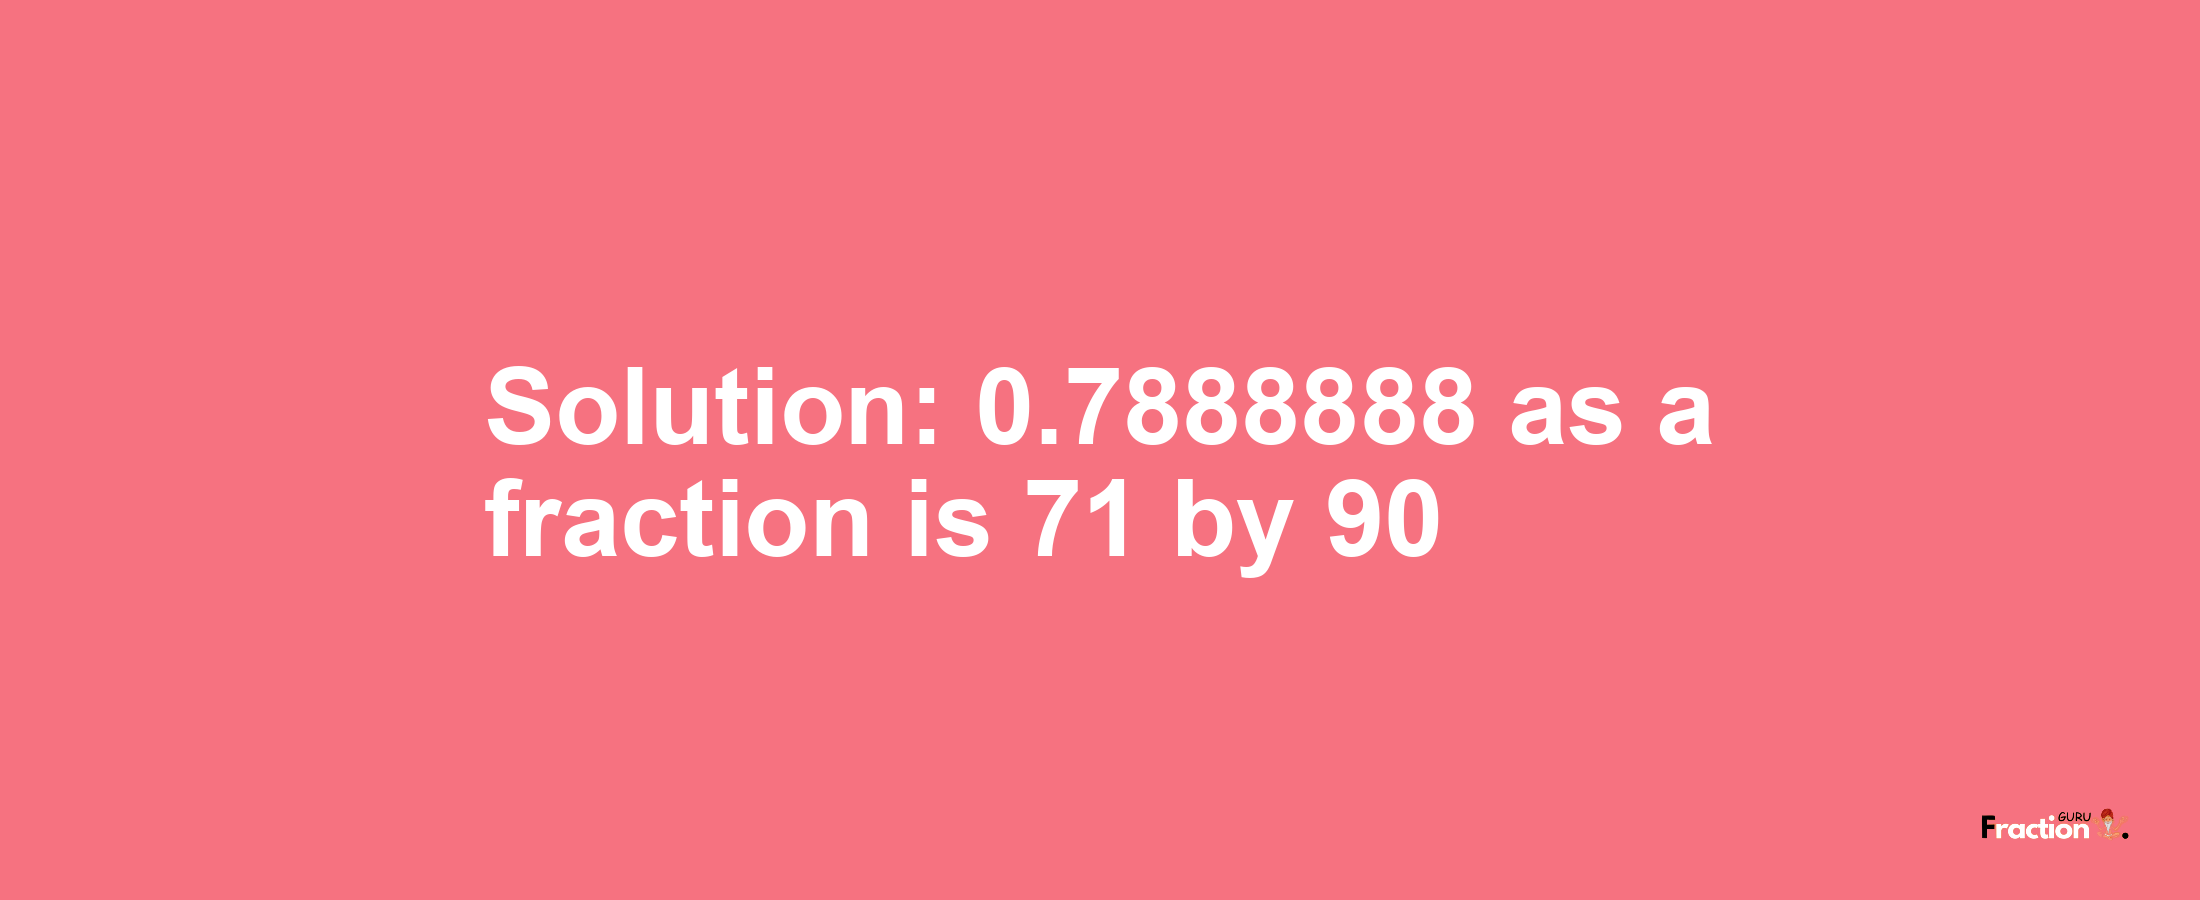 Solution:0.7888888 as a fraction is 71/90